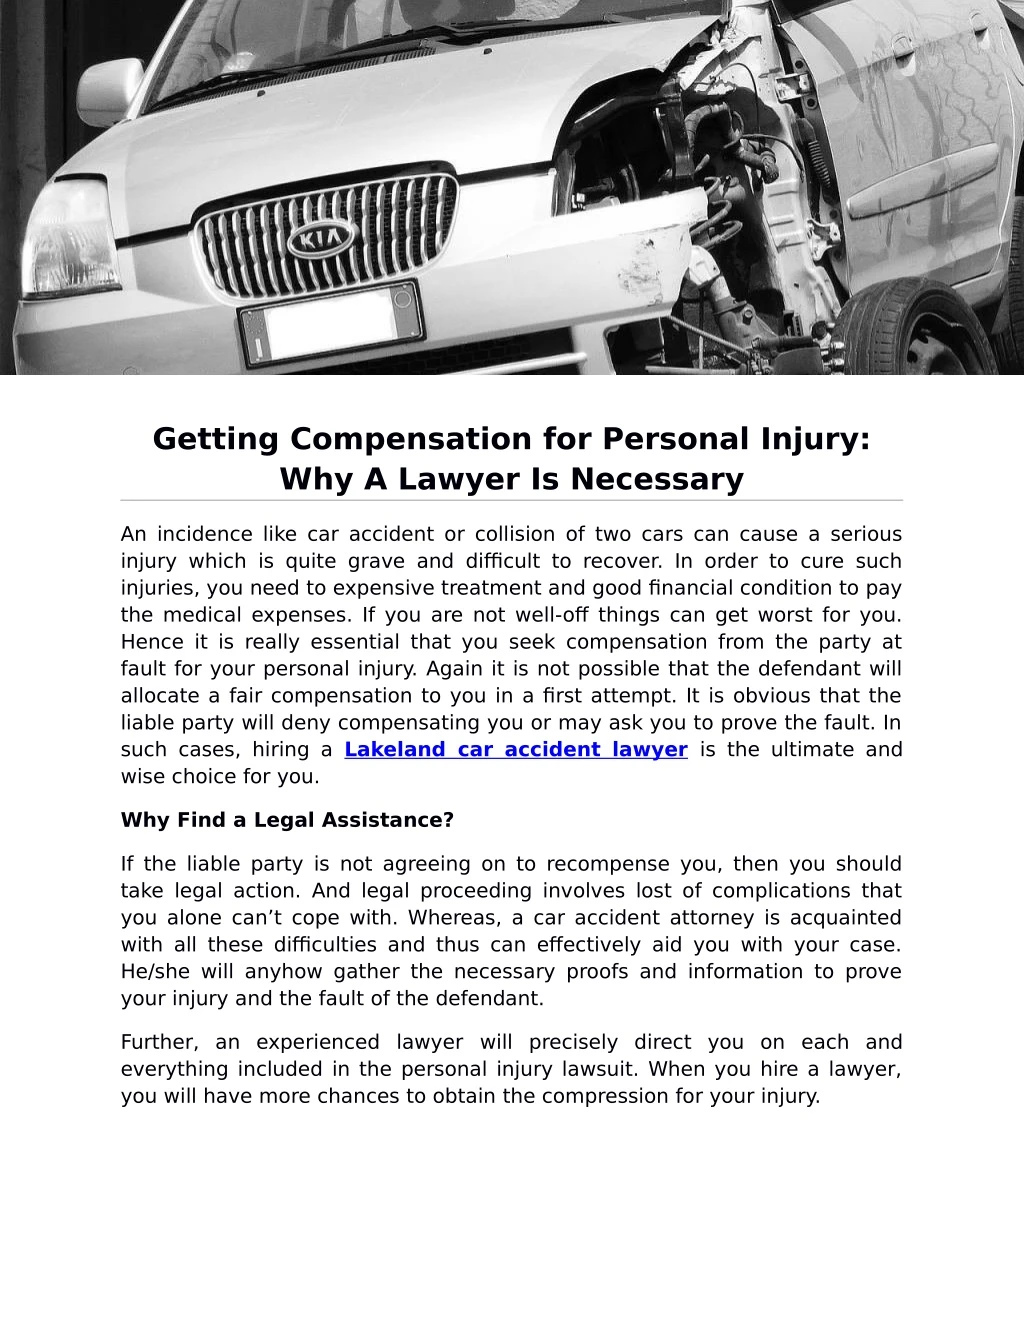 getting compensation for personal injury